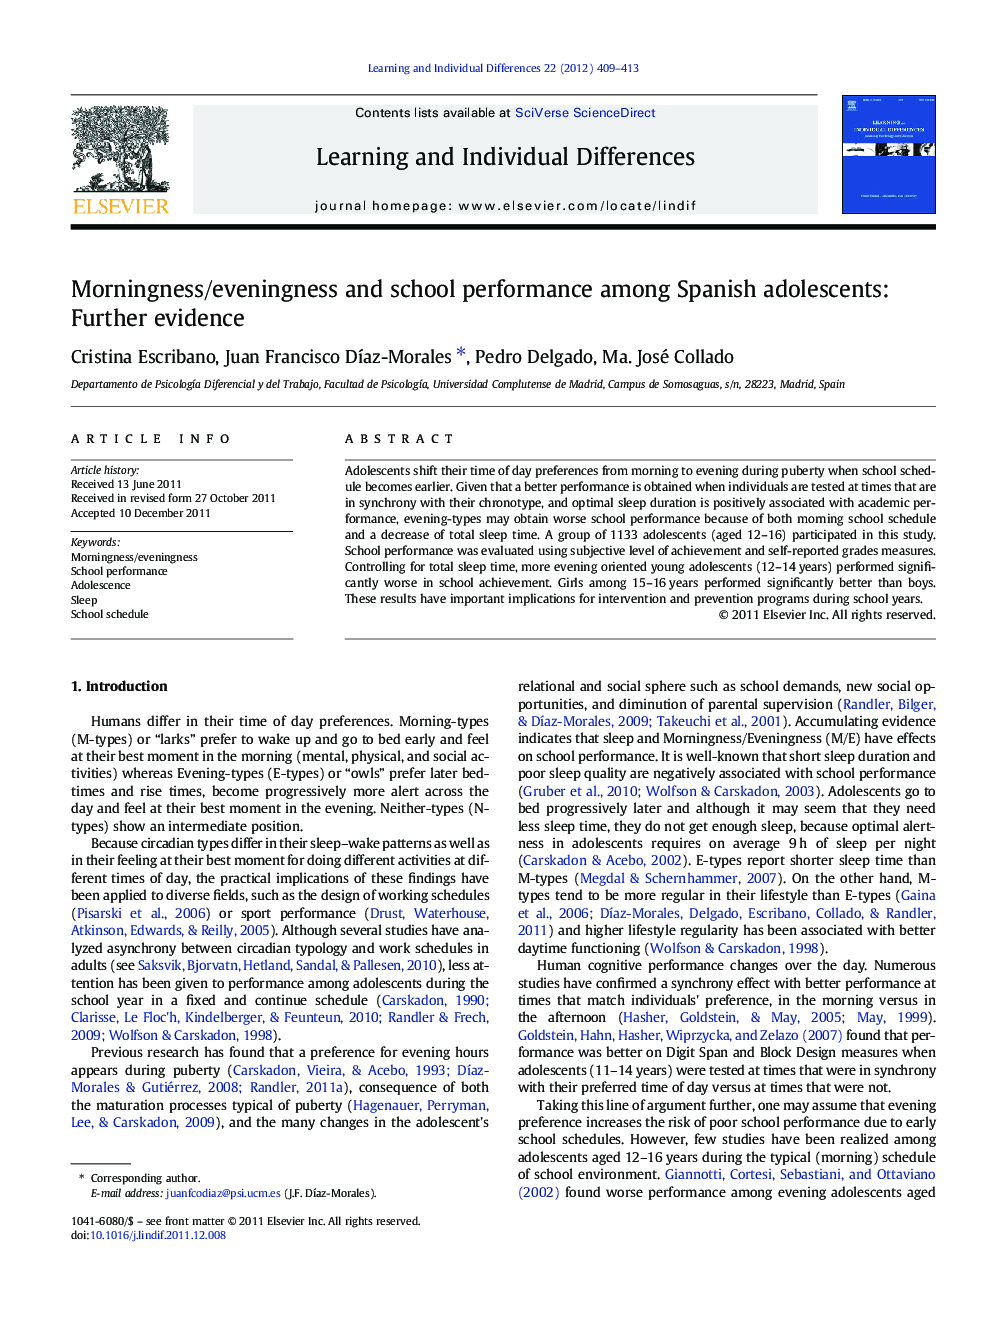 Morningness/eveningness and school performance among Spanish adolescents: Further evidence